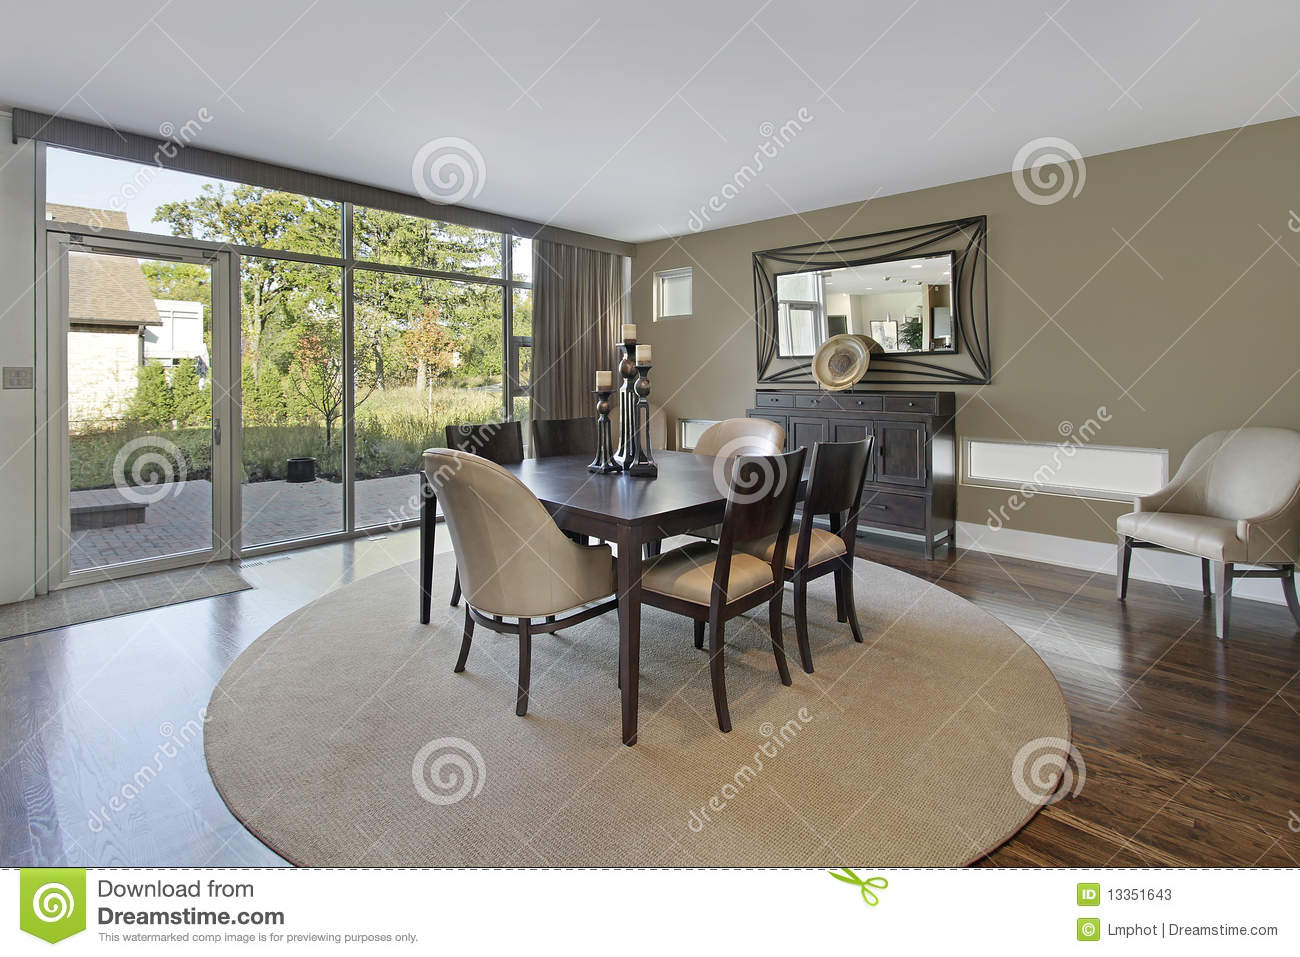 Dining Room With Patio View Stock Photos   Image  13351643